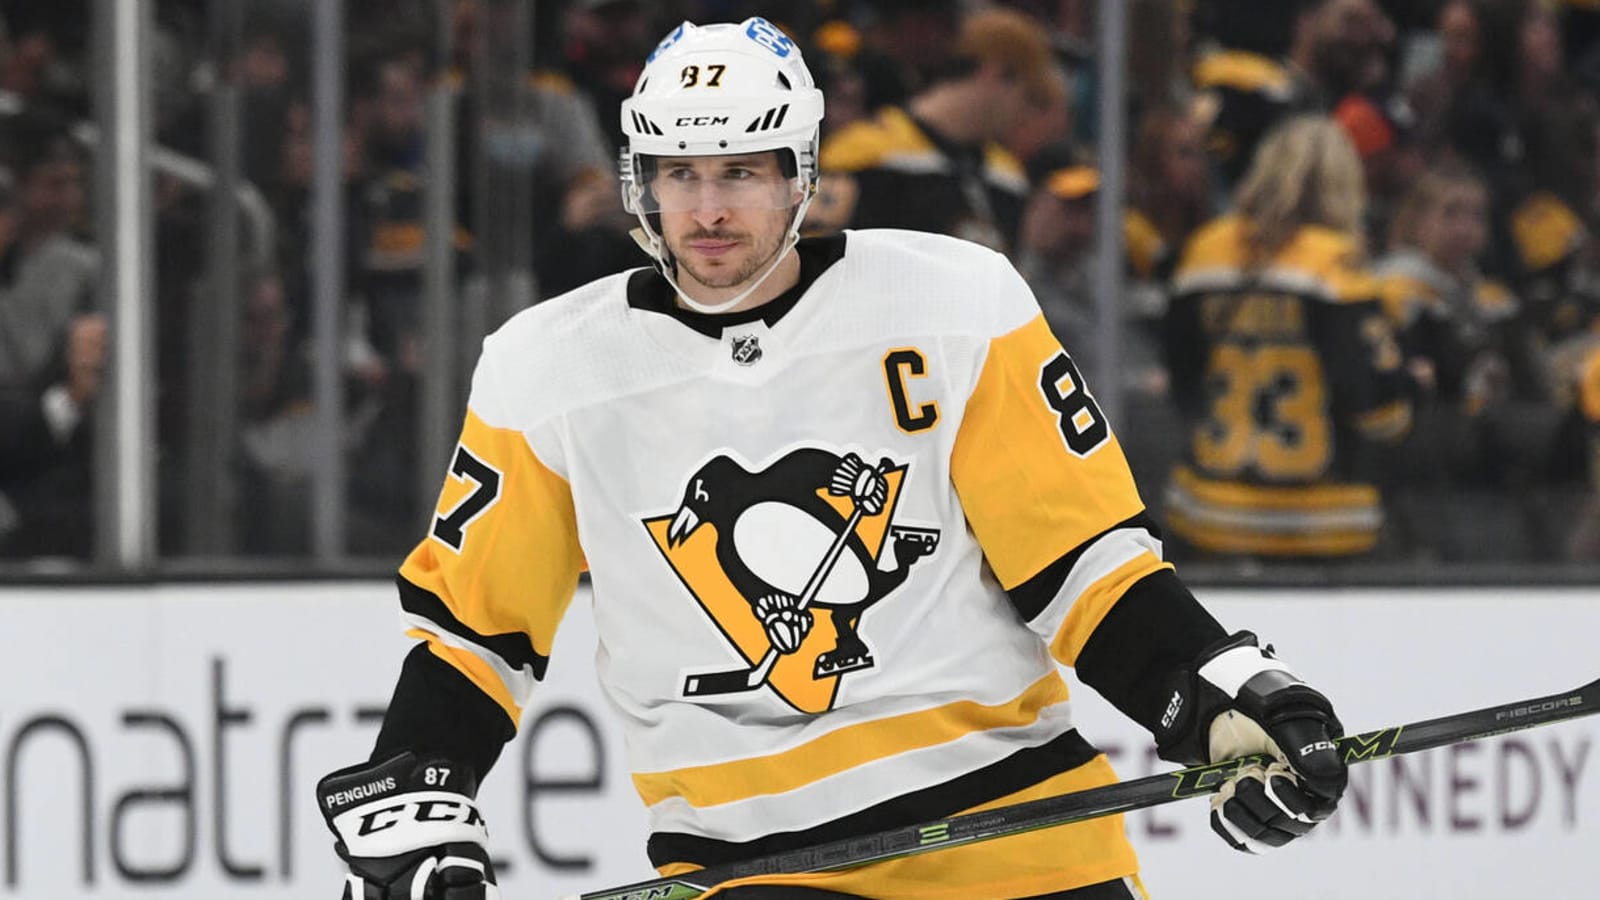 Stanley Cup playoffs: Penguins' Sidney Crosby injures upper body 